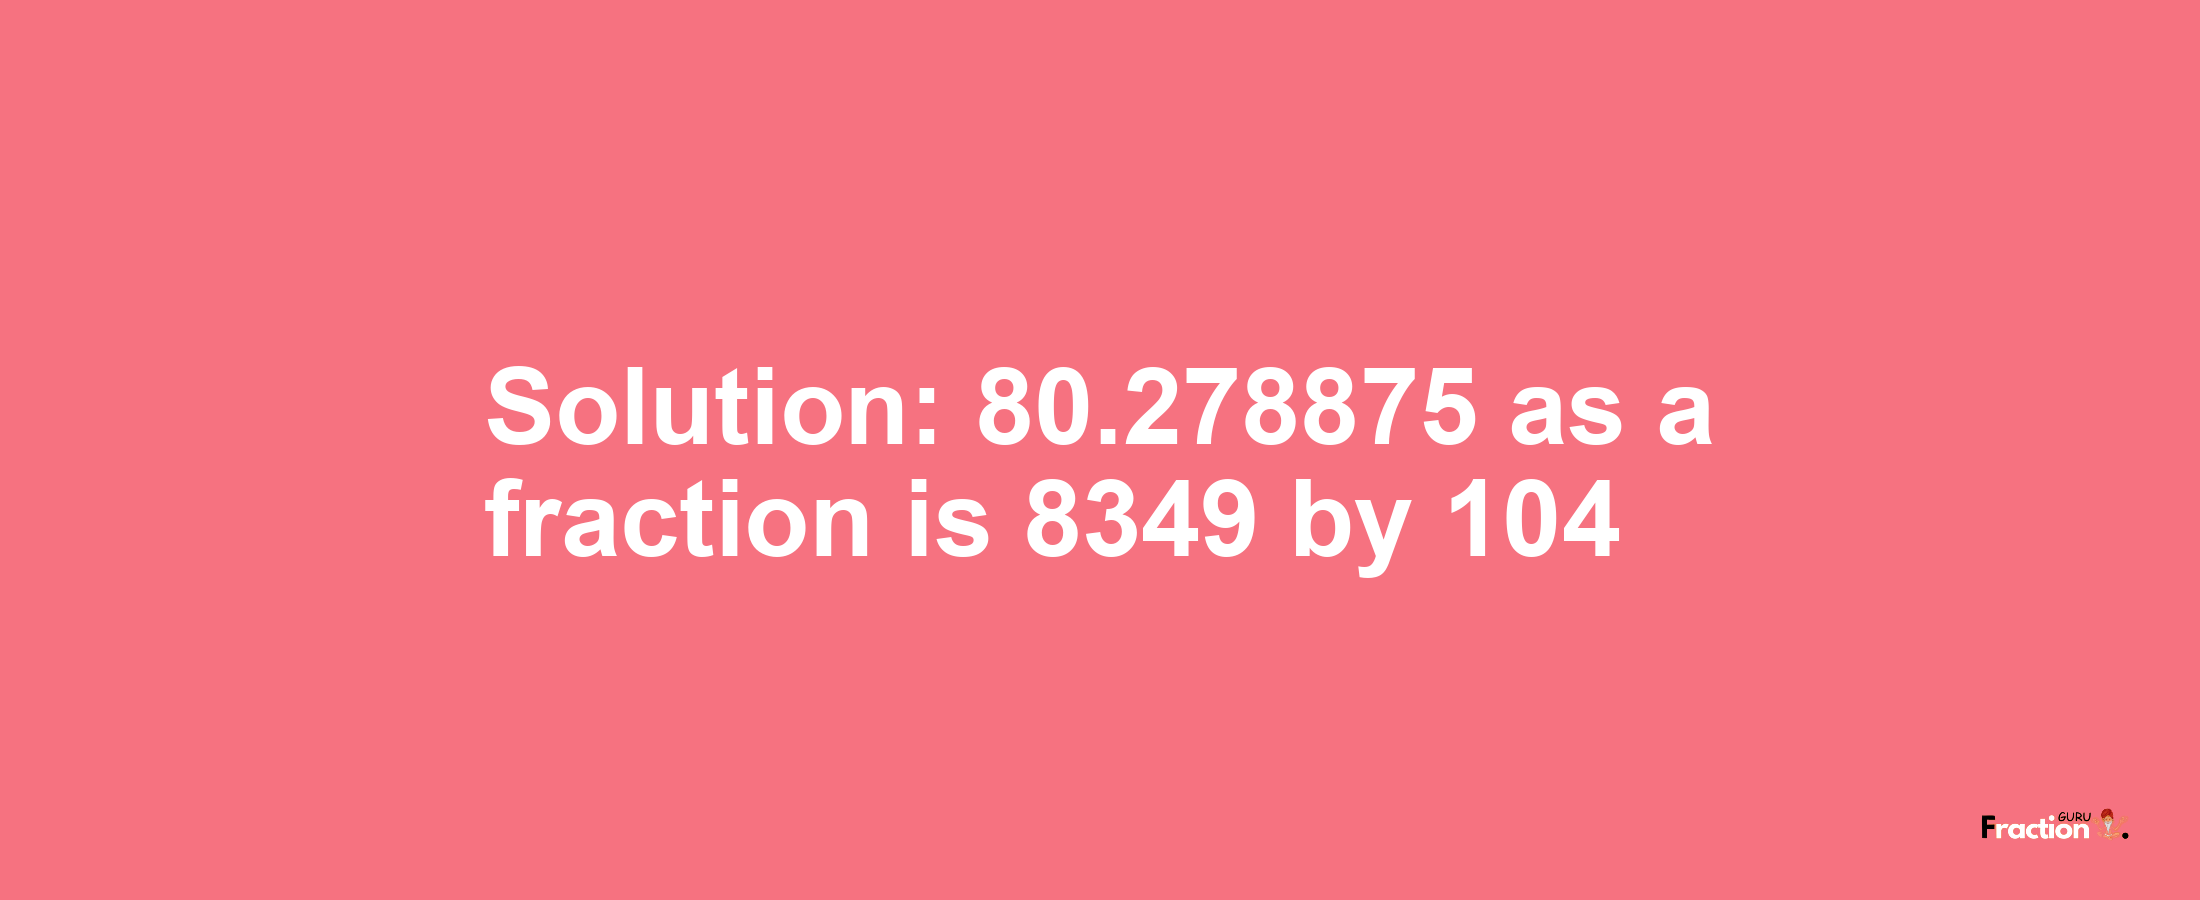 Solution:80.278875 as a fraction is 8349/104